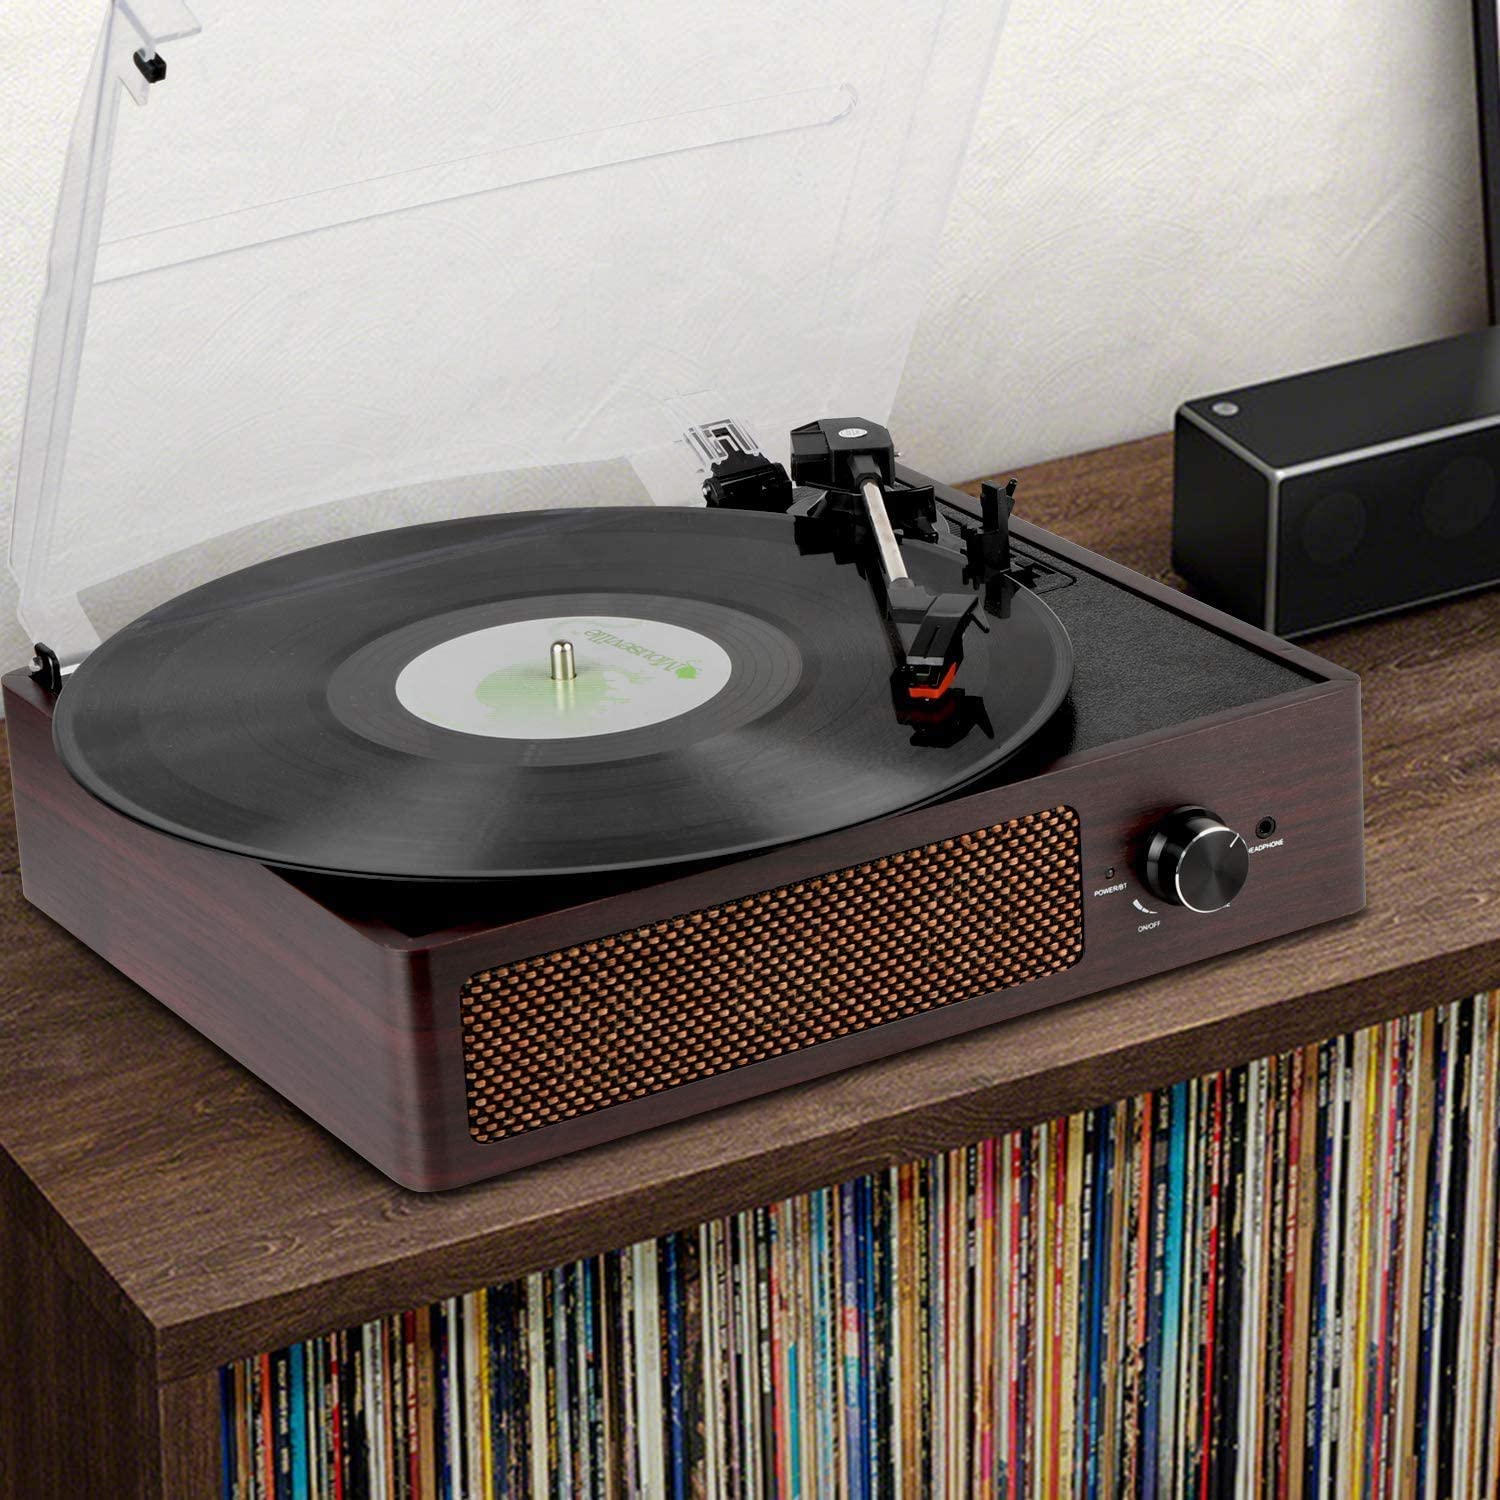 Digitnow Three Speeds Turntable Retro Record Player with Built-in Ster